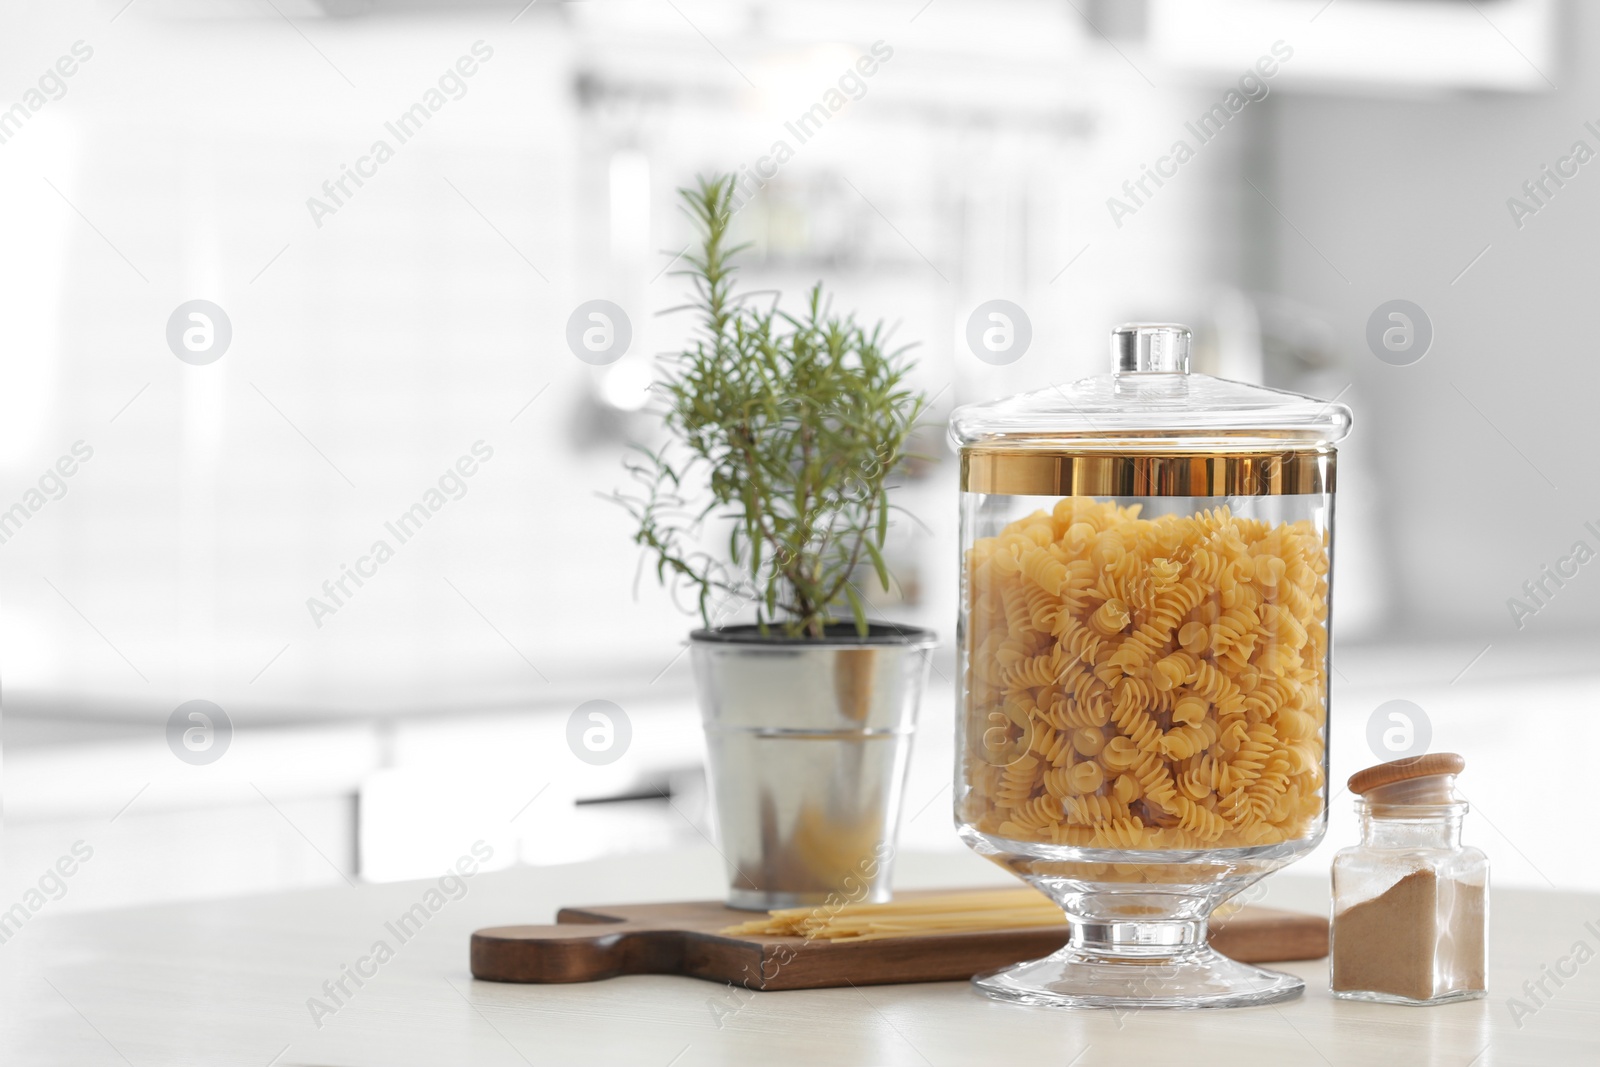 Photo of Raw pasta on wooden table in modern kitchen